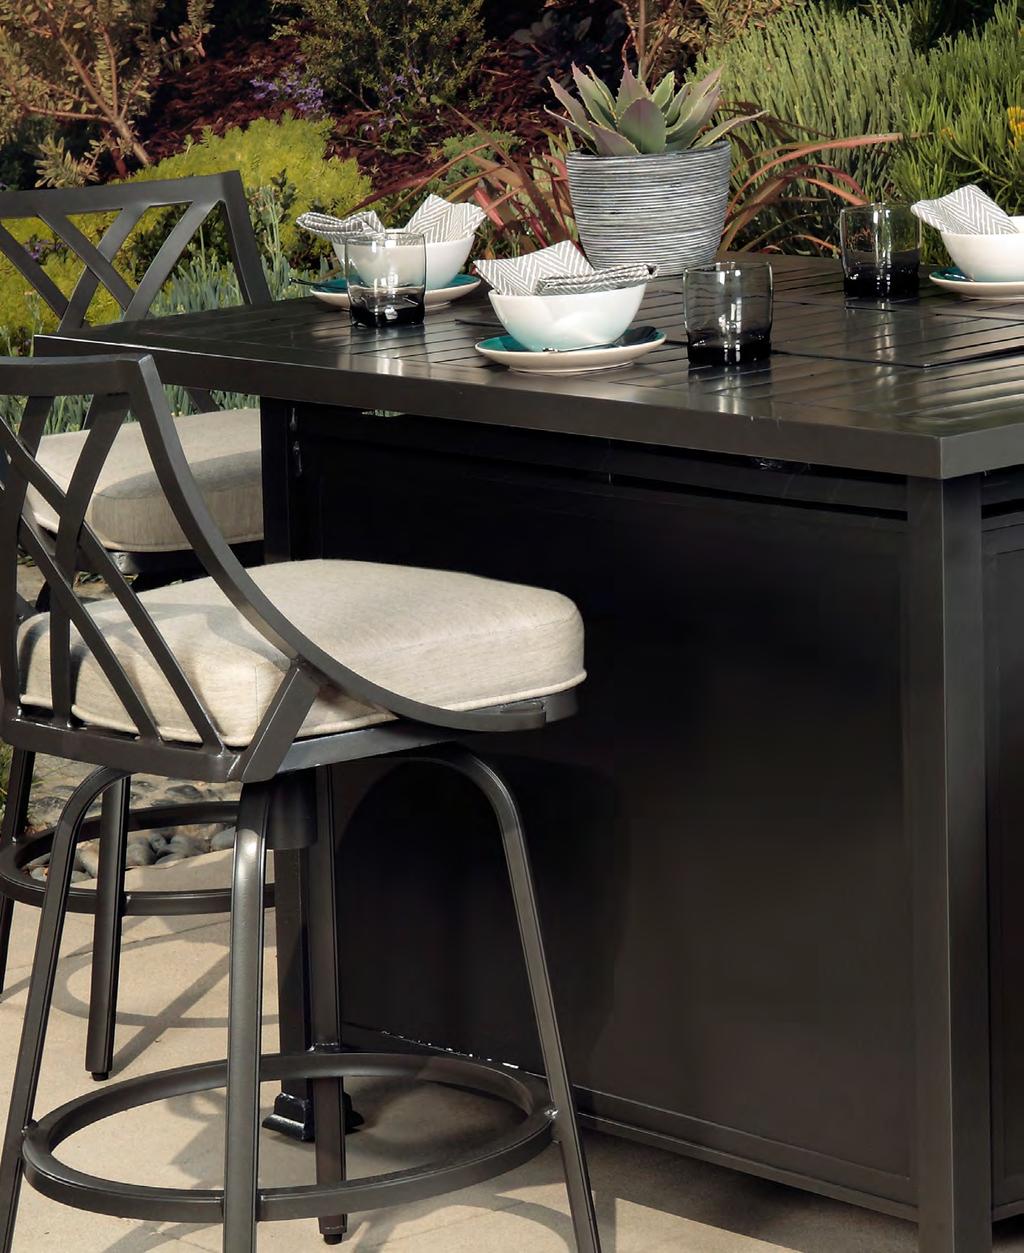 STOOLS Throw an outdoor party and dazzle your guests with Mallin barstools in your patio garden or poolside kitchen.